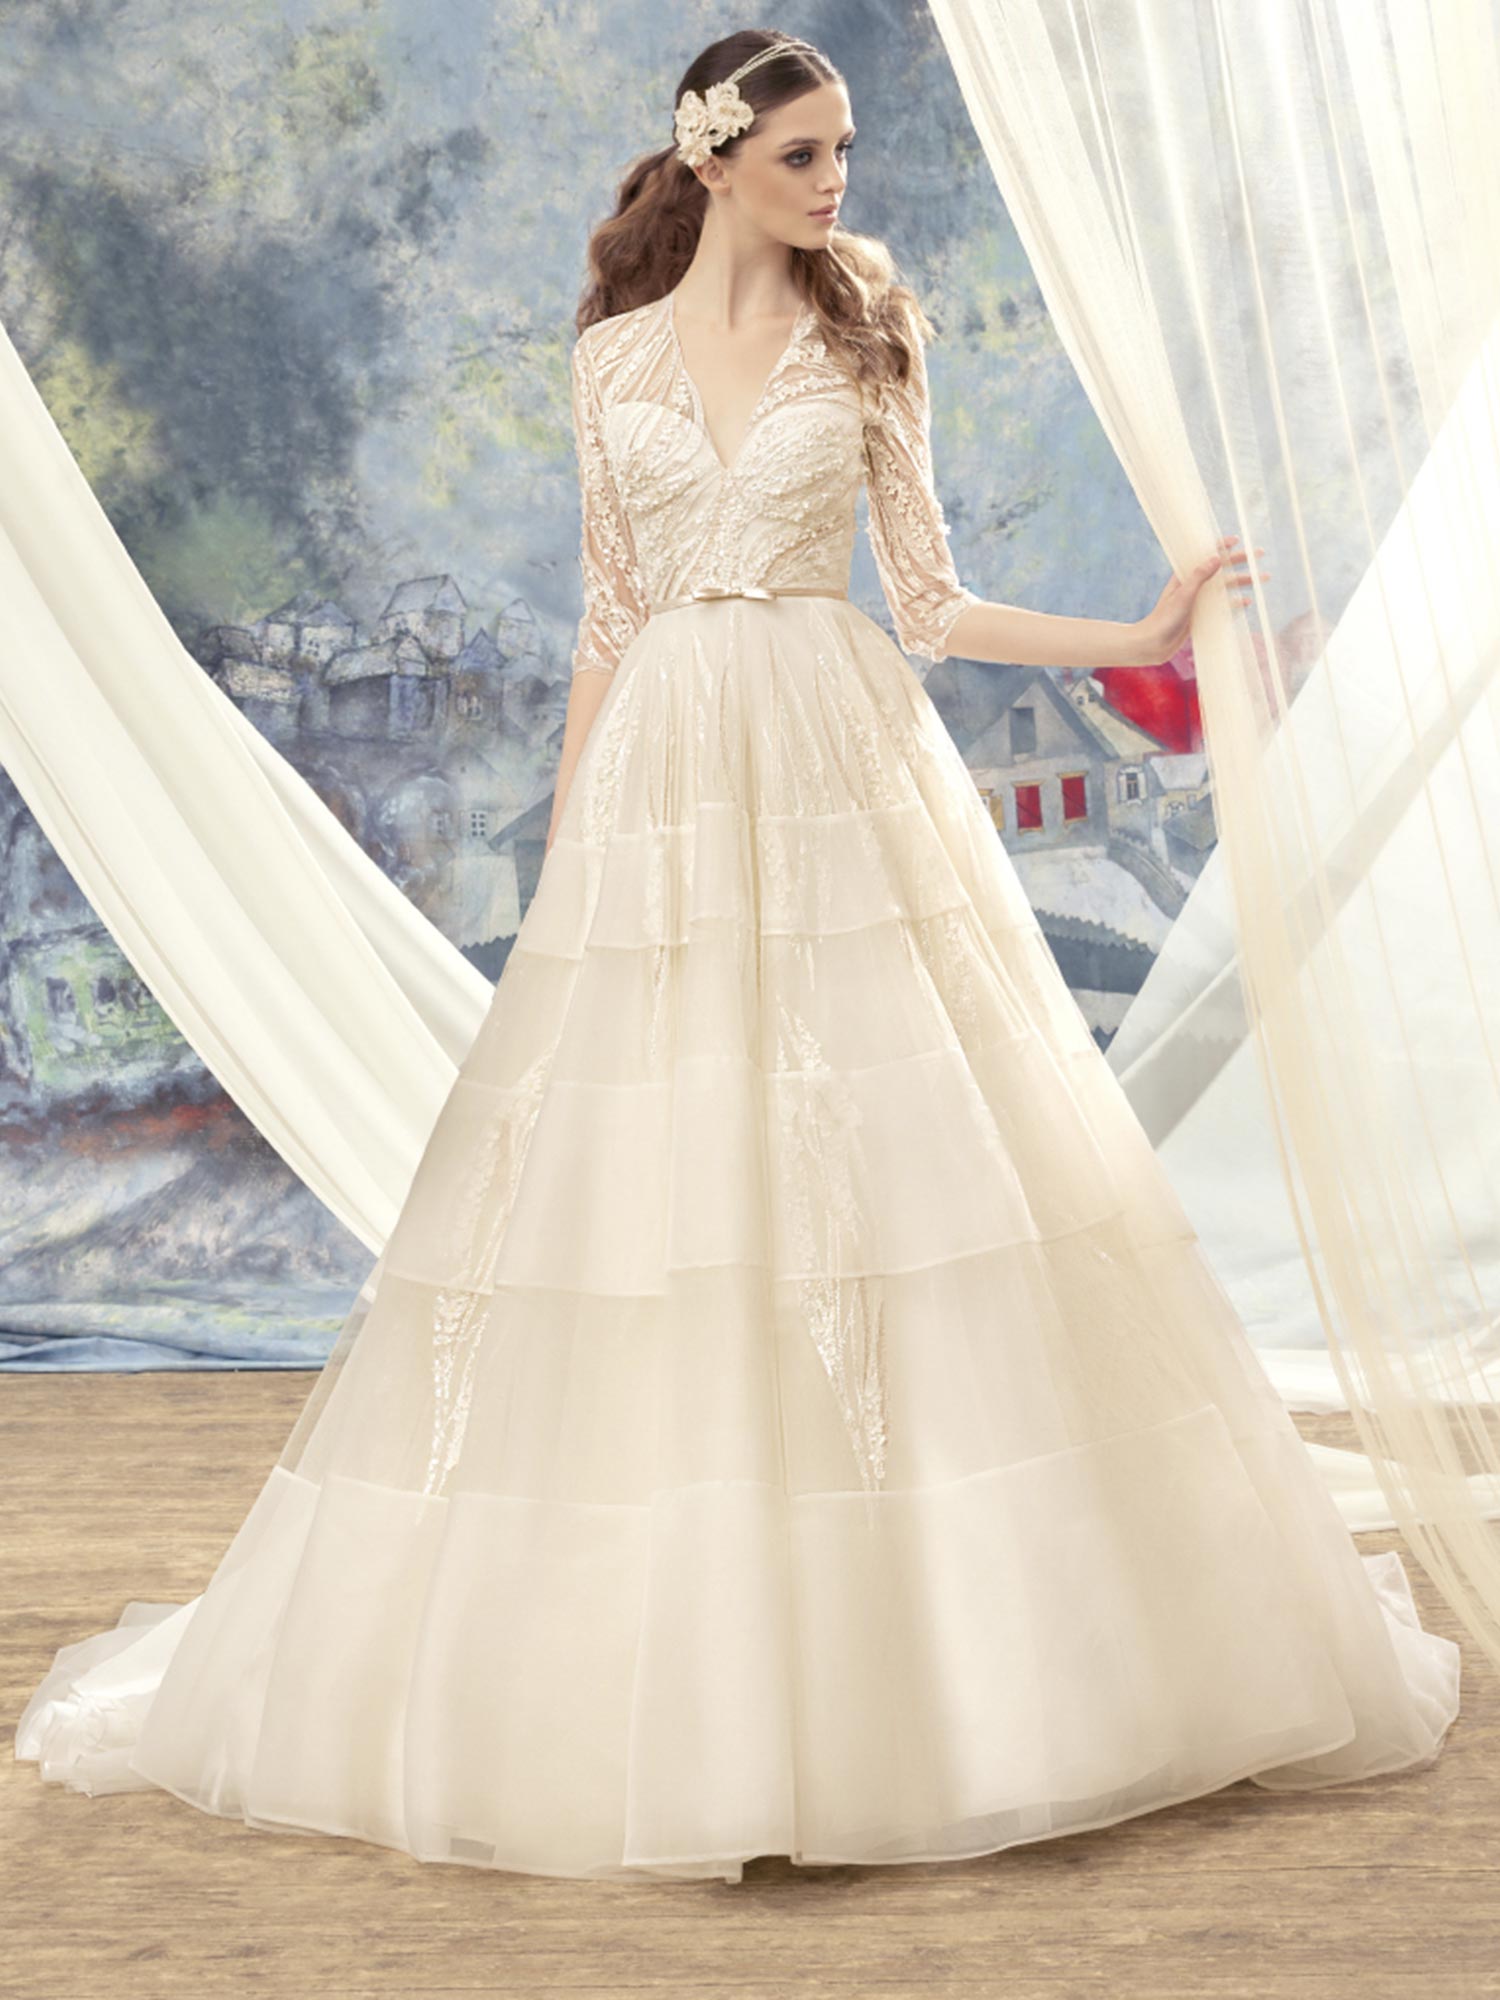 Papilio Lace ball gown wedding dress with tiered skirt